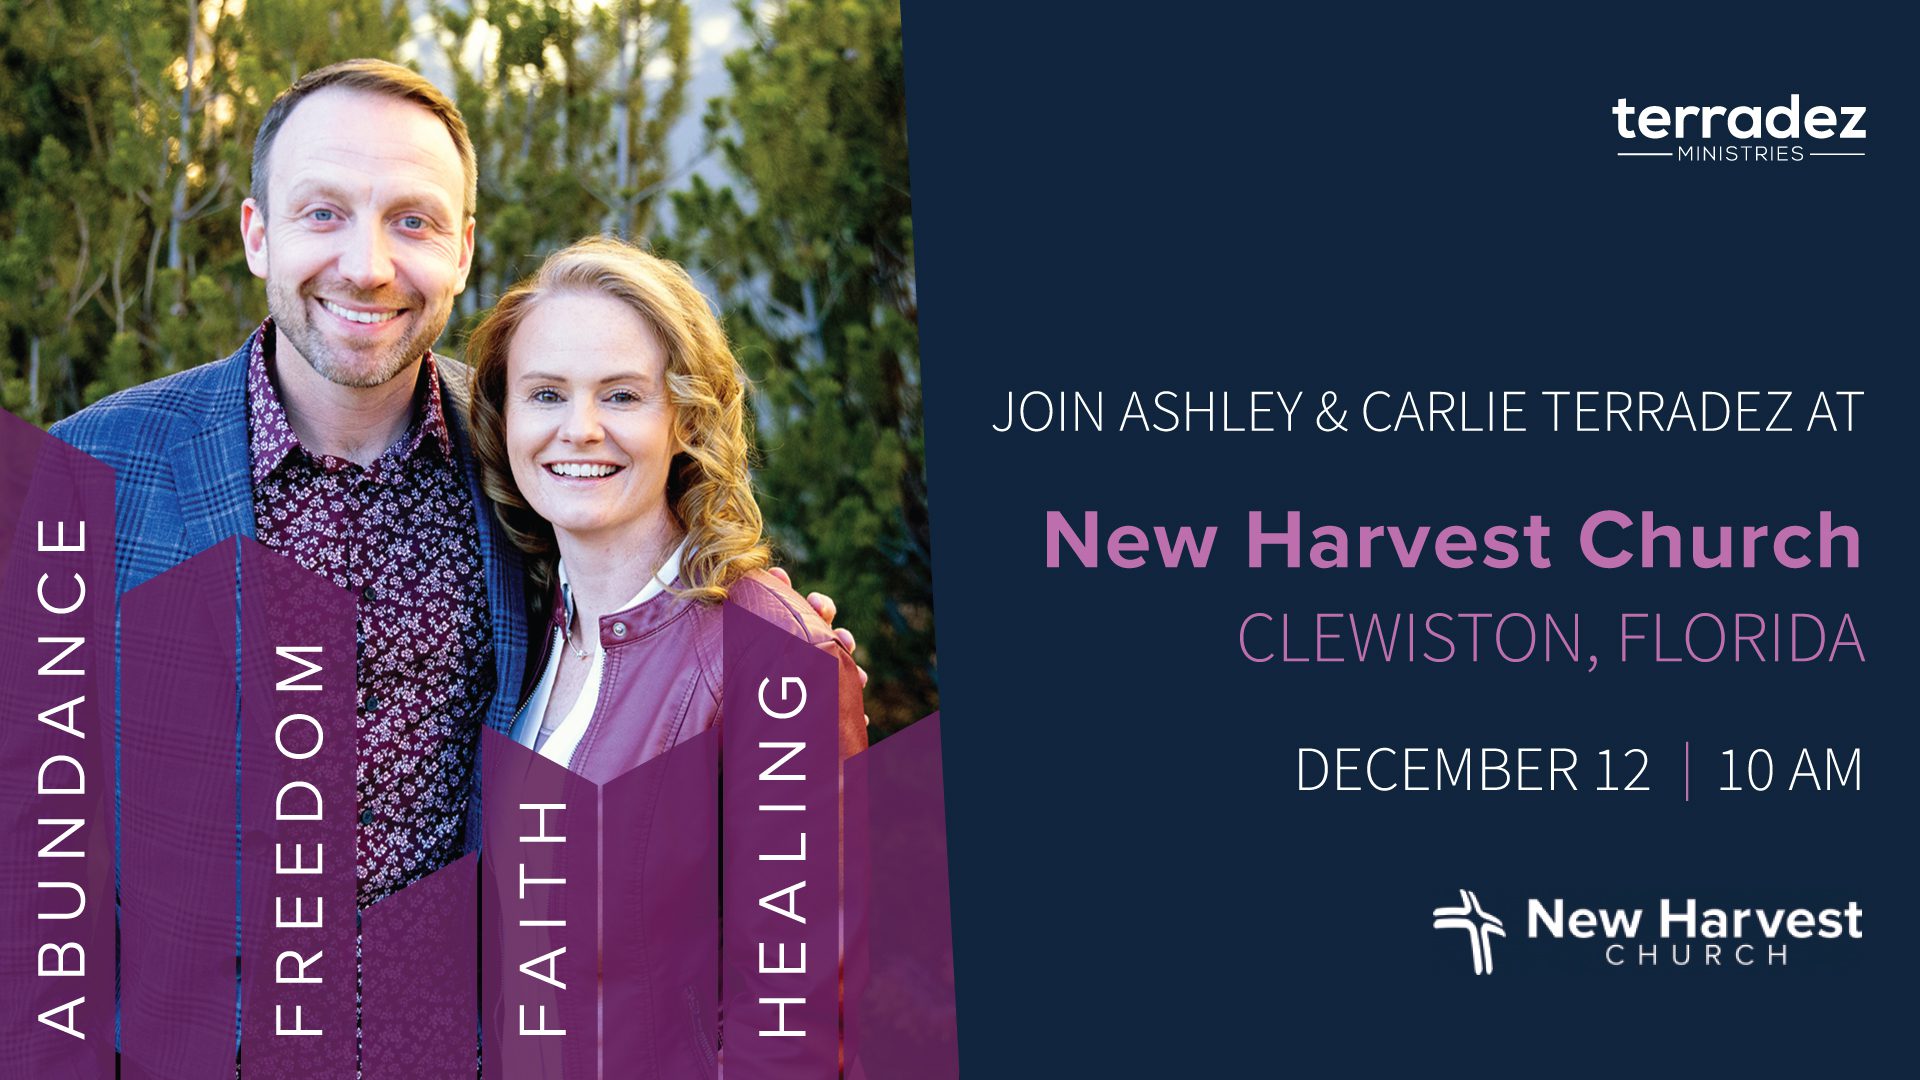 Ashley and Carlie Terradez at New Harvest Church in Clewiston, Florida on December 12, 2021.